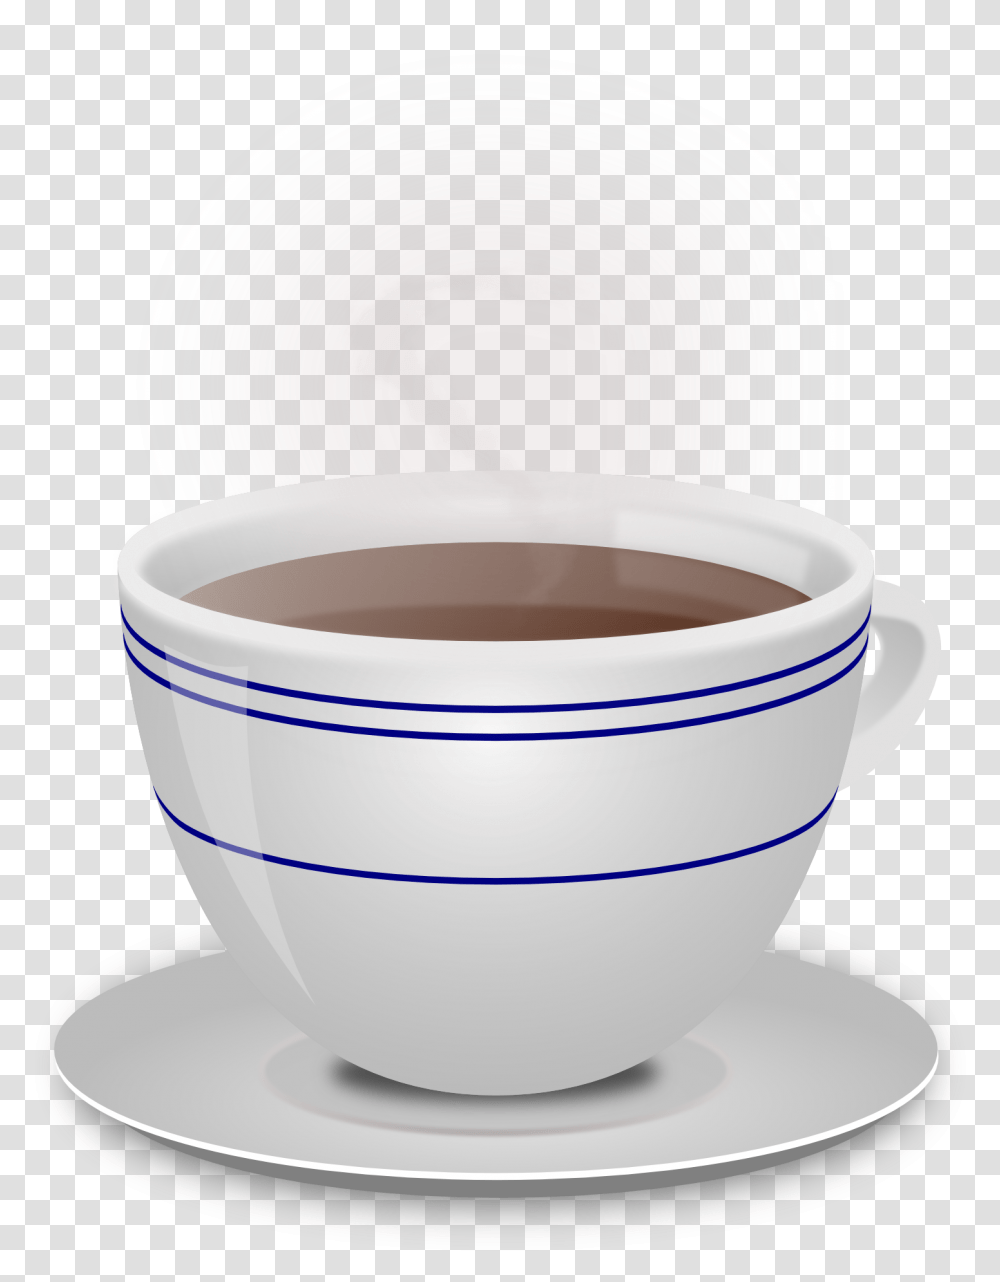 Cup Coffee Beverage Ceramic Hot Mug Saucer Steam Tea Cup Plate, Coffee Cup, Pottery, Drink, Bowl Transparent Png